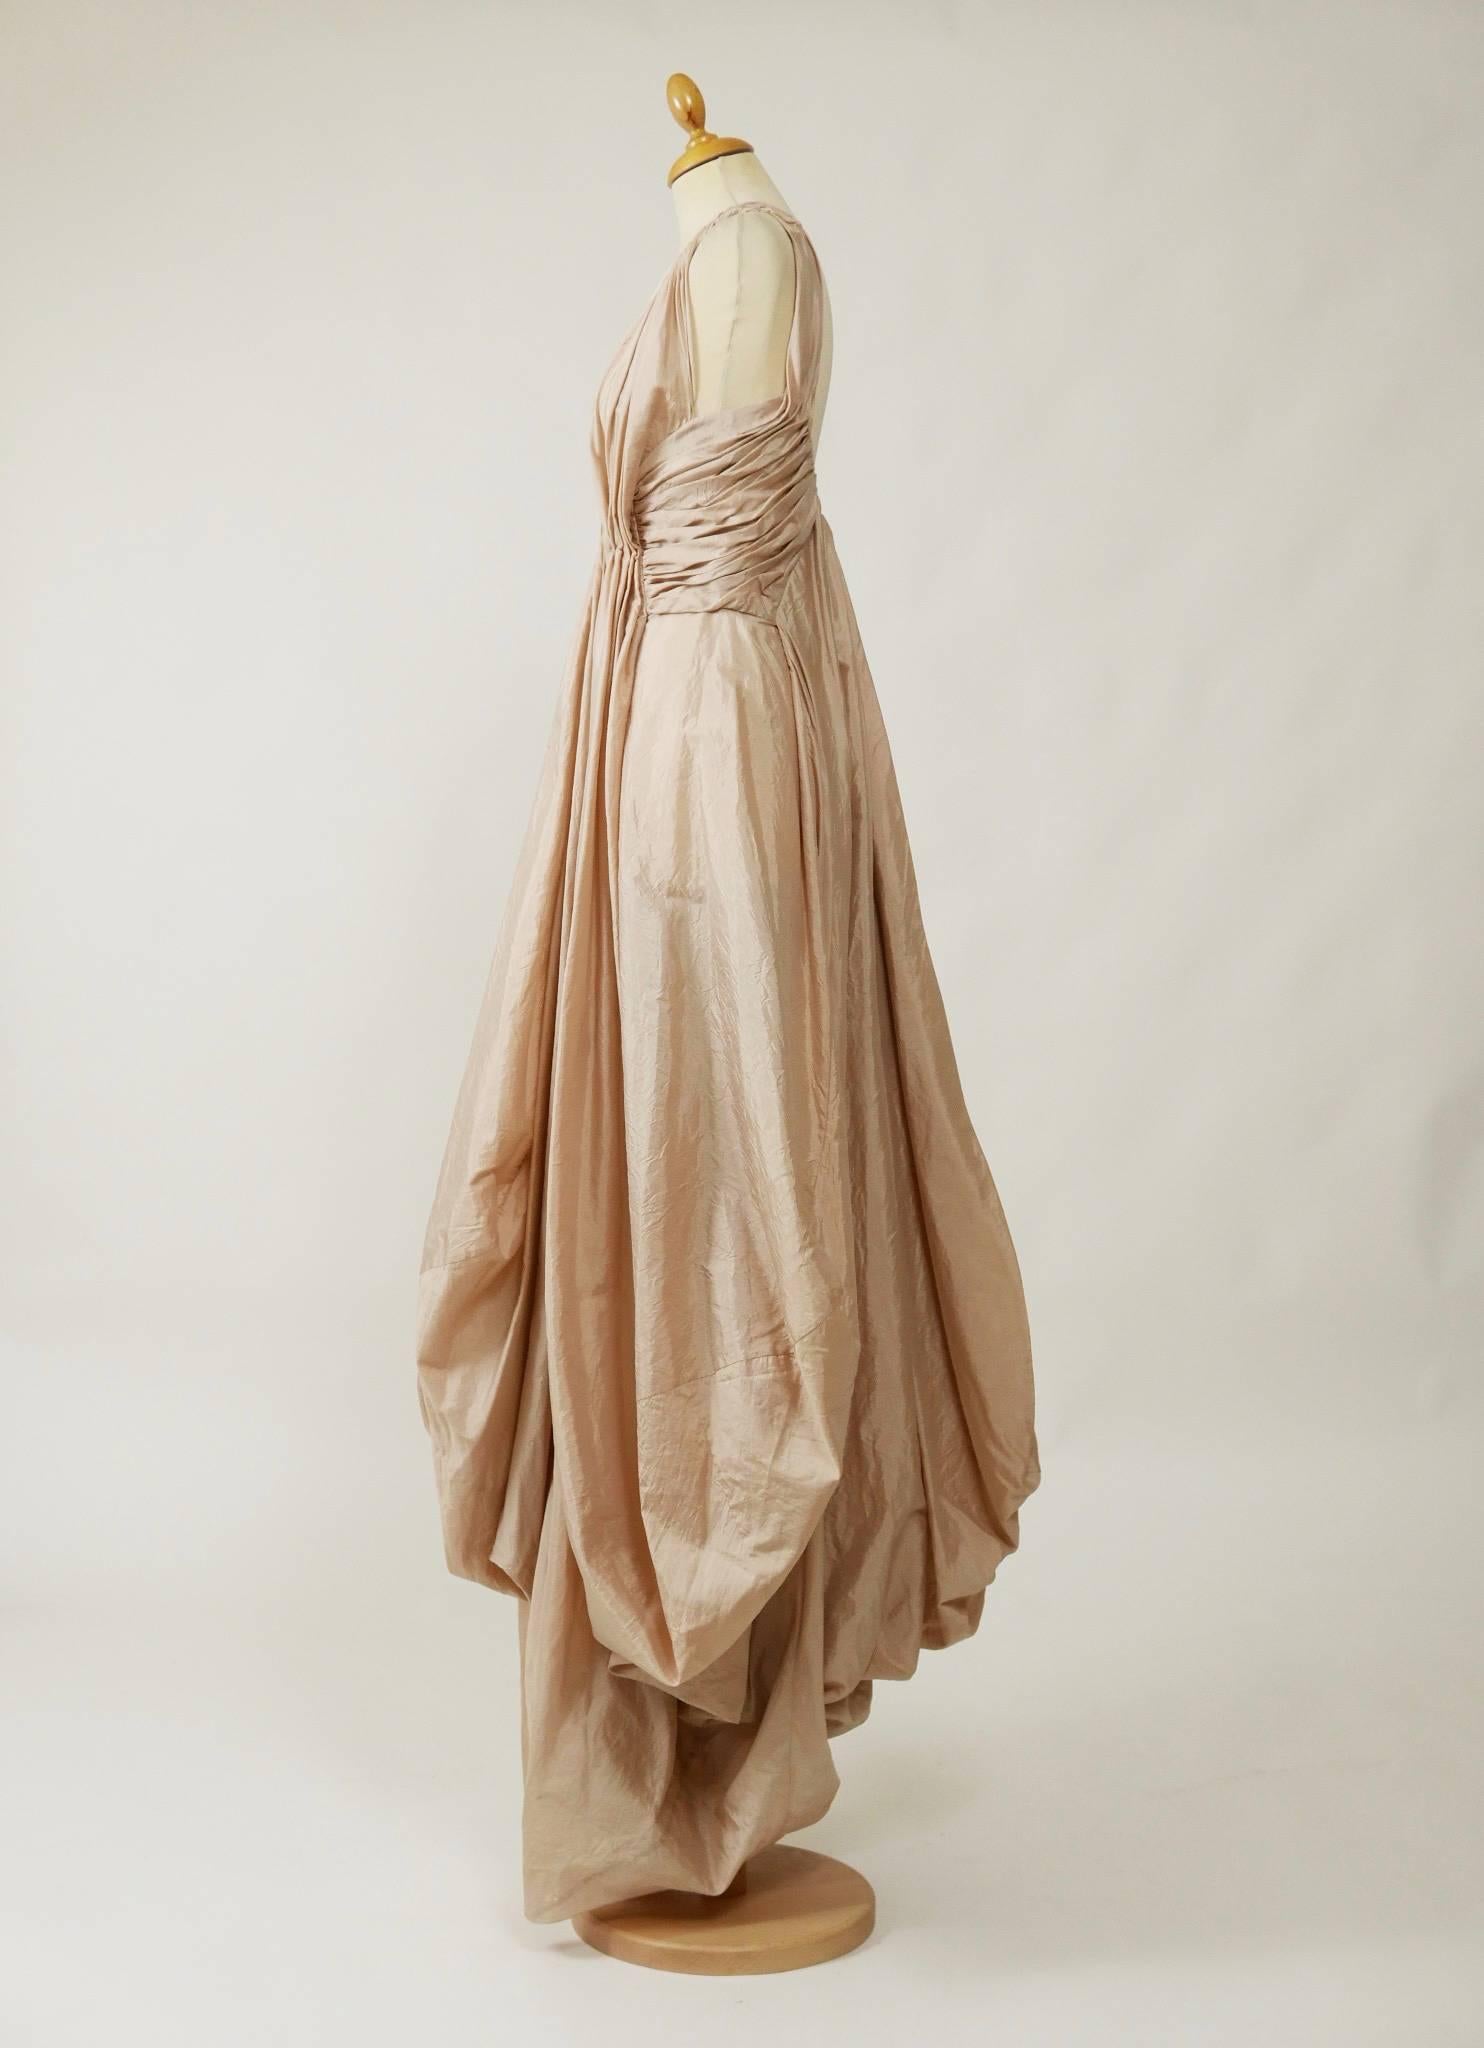 This amazing Christian Dior long evening dress is in powder pink silk fabric. It has Empire line, hooks closure on the back and deep collar.

Very good vintage condition. 

Label: Christian Dior Boutique - Paris
Fabric: silk
Color: Powder